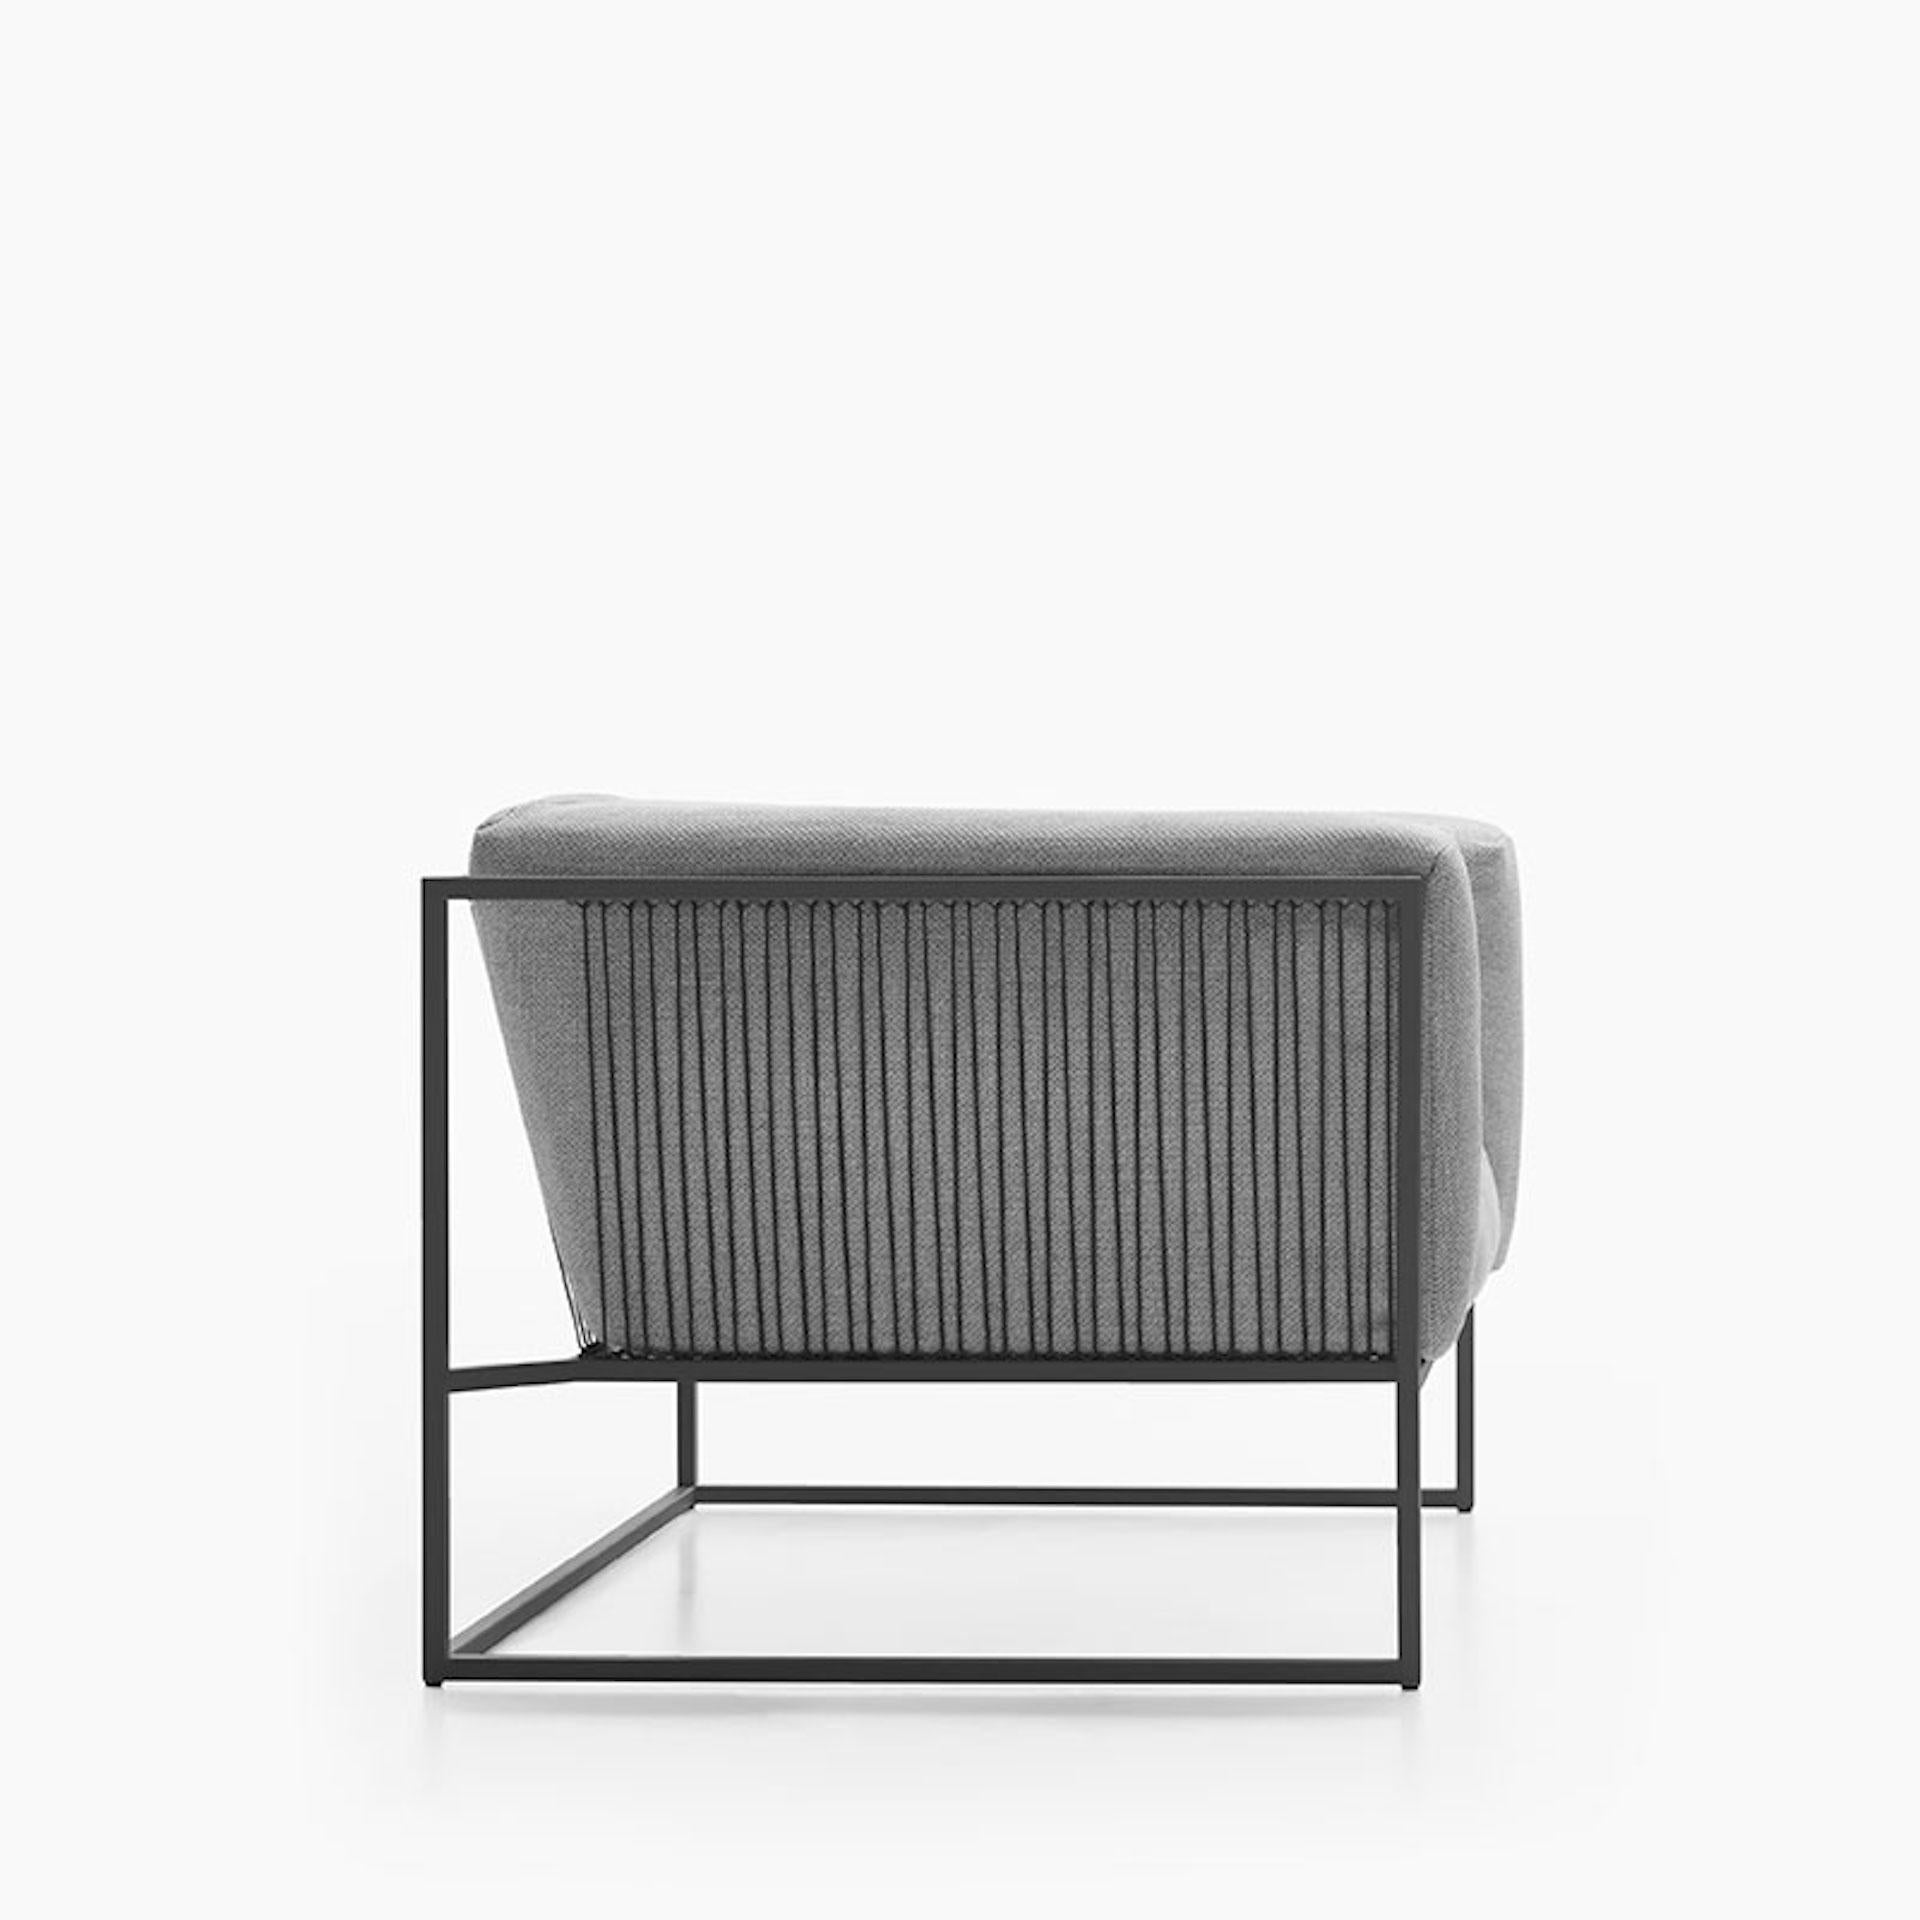 OUTDOOR ​FIXED OR MODULAR SOFA, ARMCHAIR, POUF AND SIDE TABLE

As its name implies, ARPA Collection is inspired by the harp, one of the most beautiful and mesmerizing musical instruments. Unlike the meticulous work involved in manufacturing a harp,